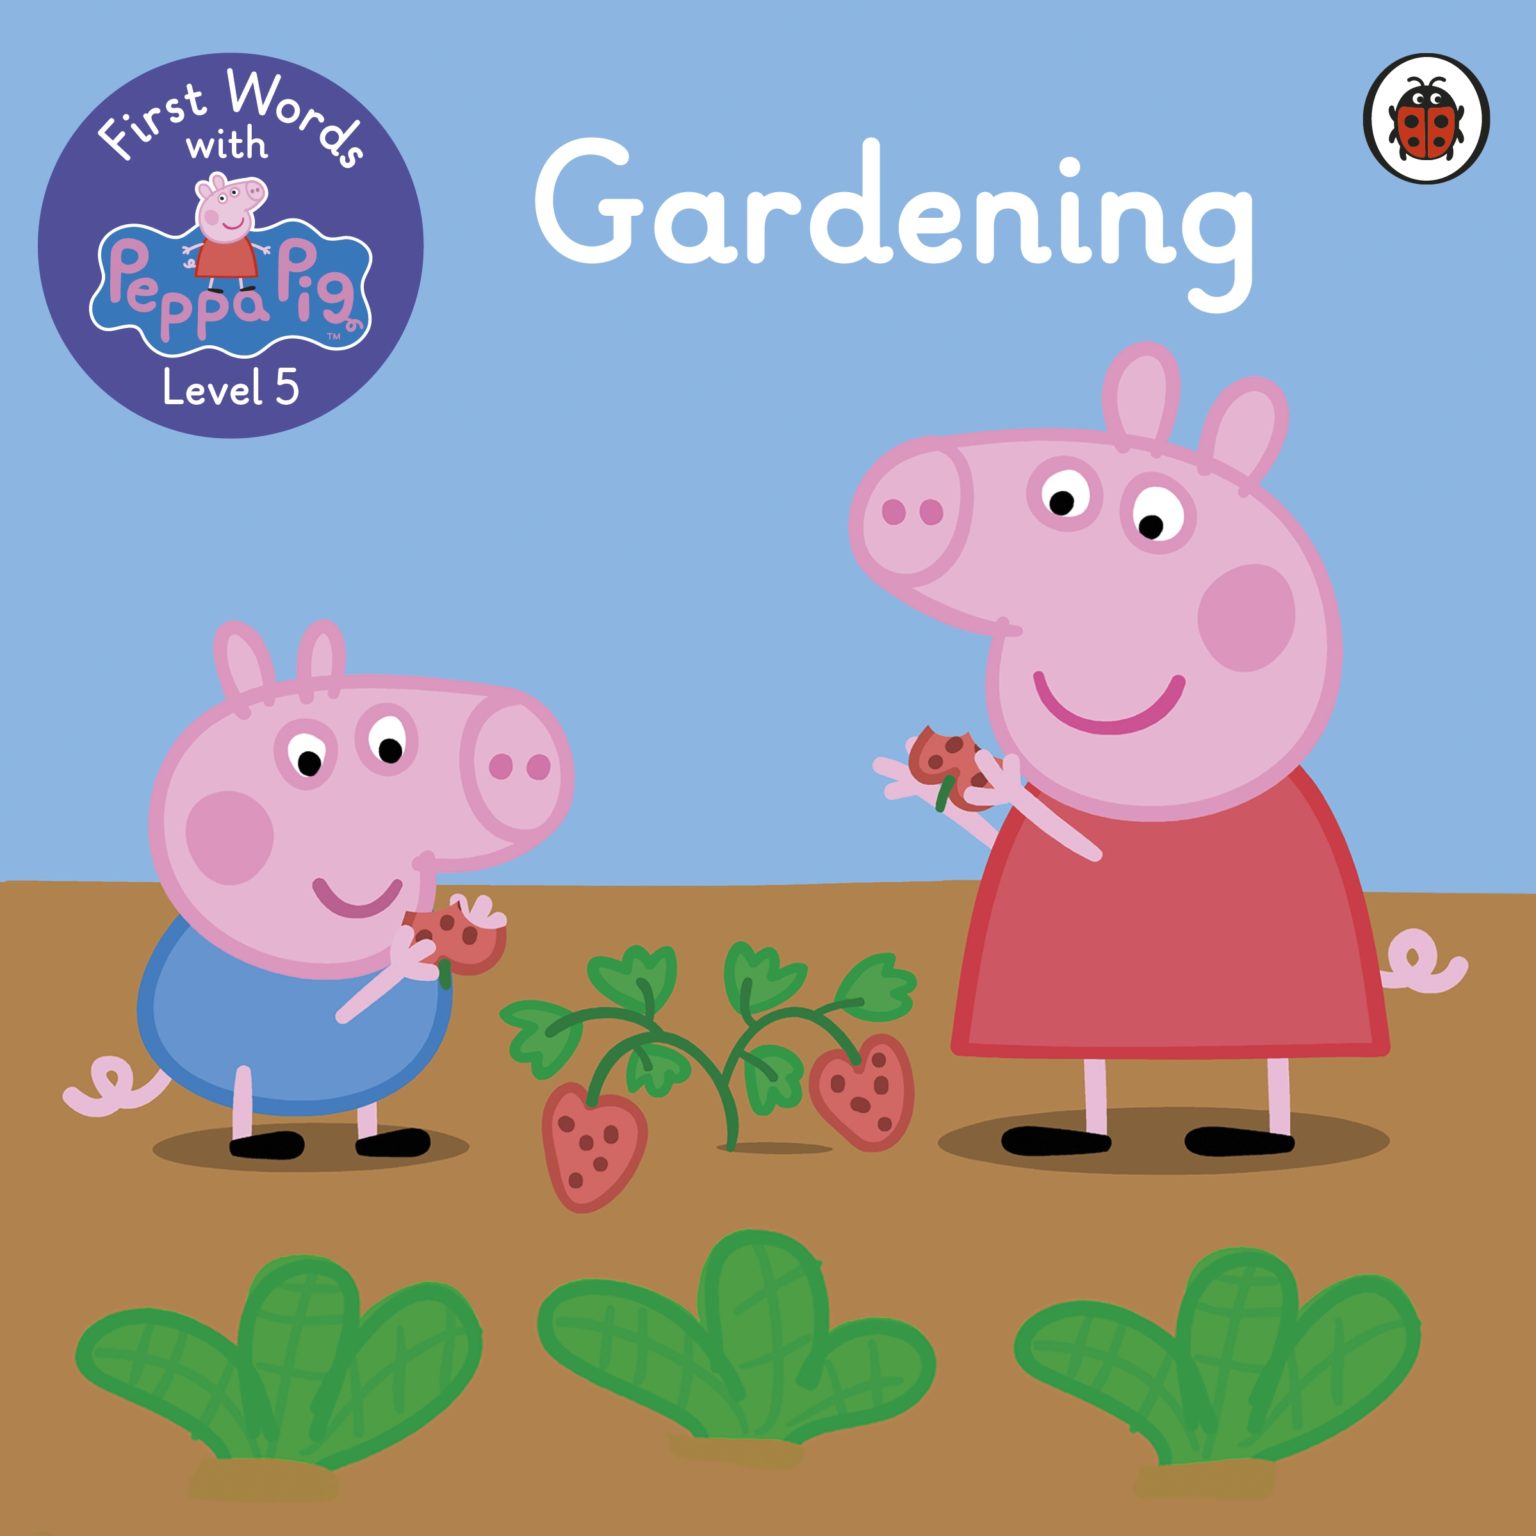 First Words with Peppa Pig: Level 5 Gardening